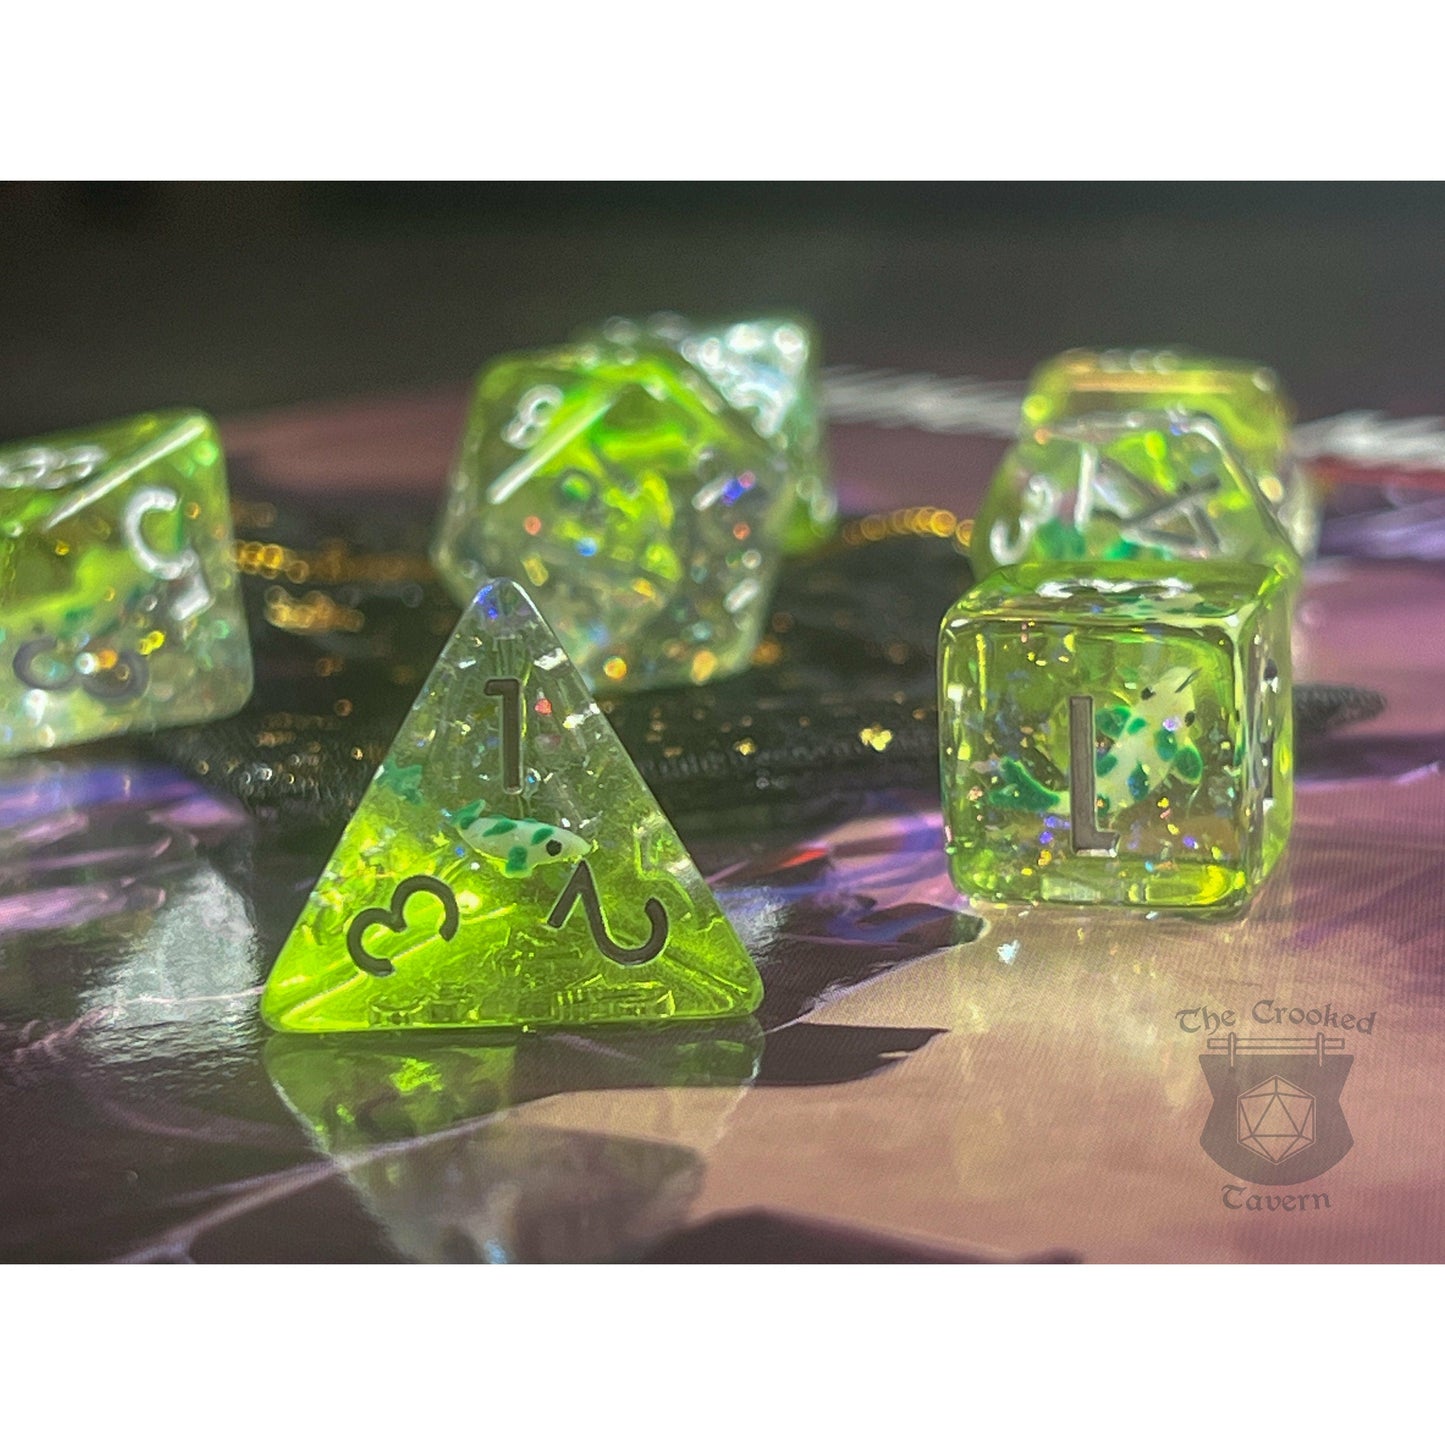 The Crooked Tavern Dice Sets Garden Koi Fish RPG Dice Set | Green and White Koi Fish Inside!